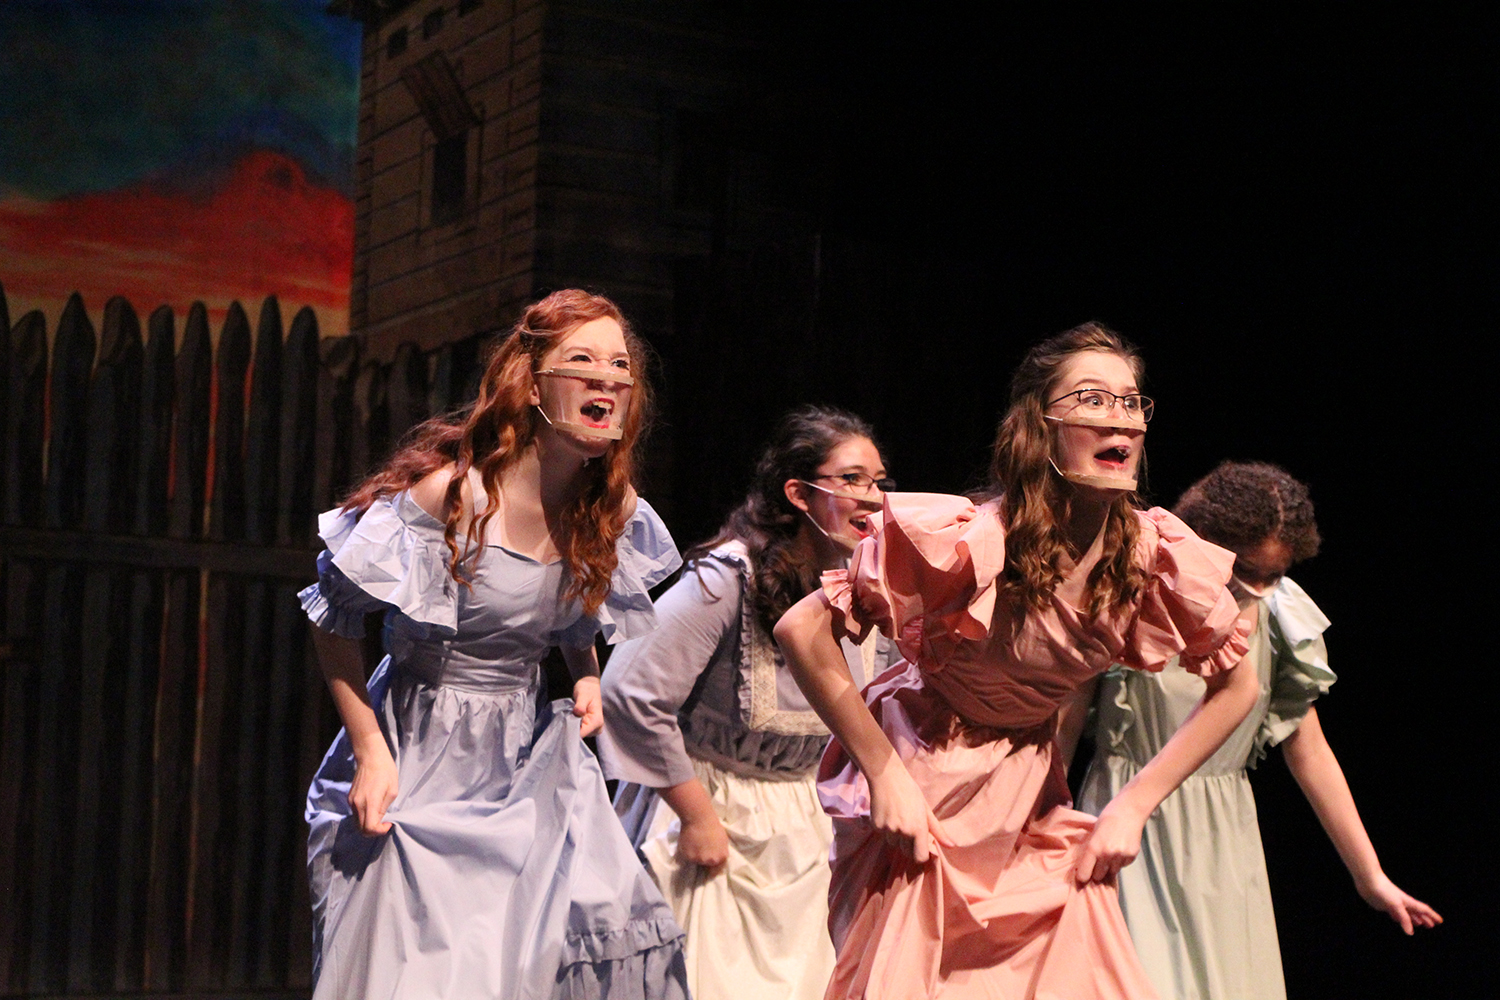 Students perform "Curtains" musical